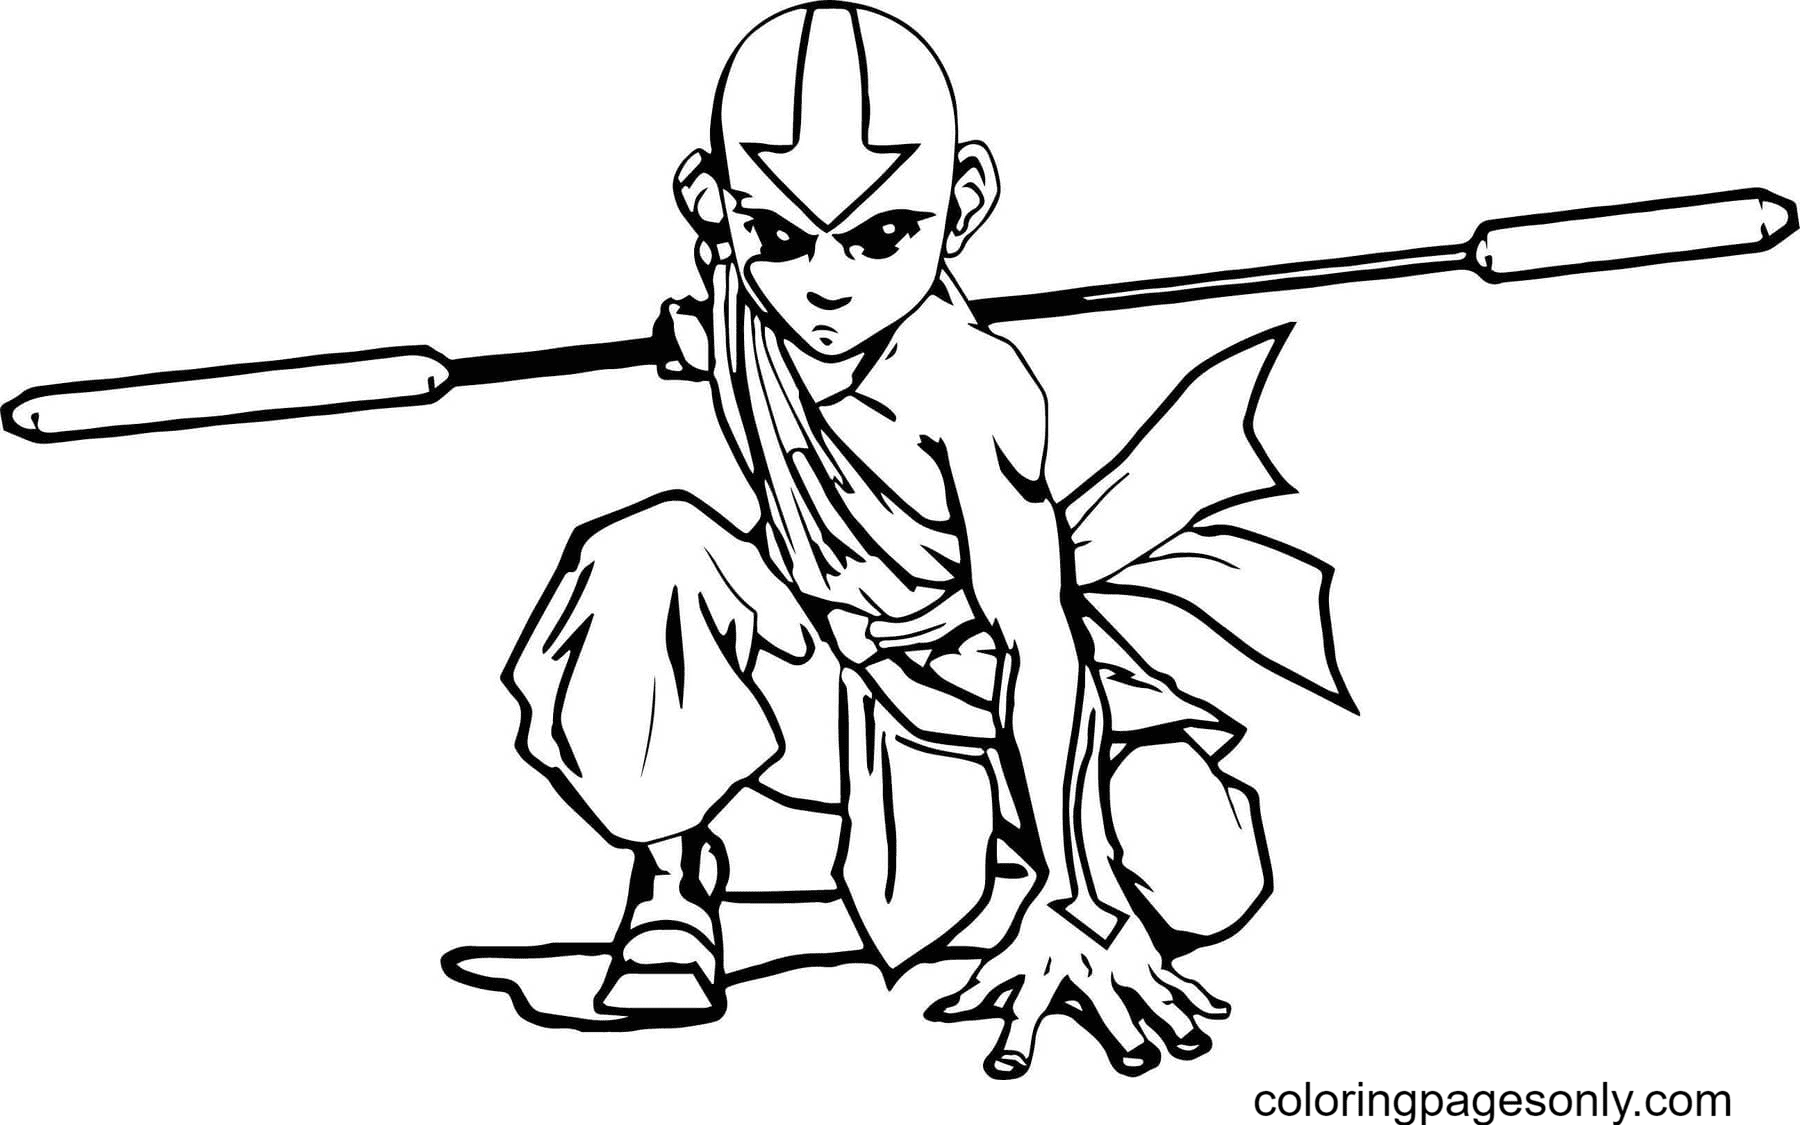 Avatar The Last Airbender Coloring Pages Aang 5574